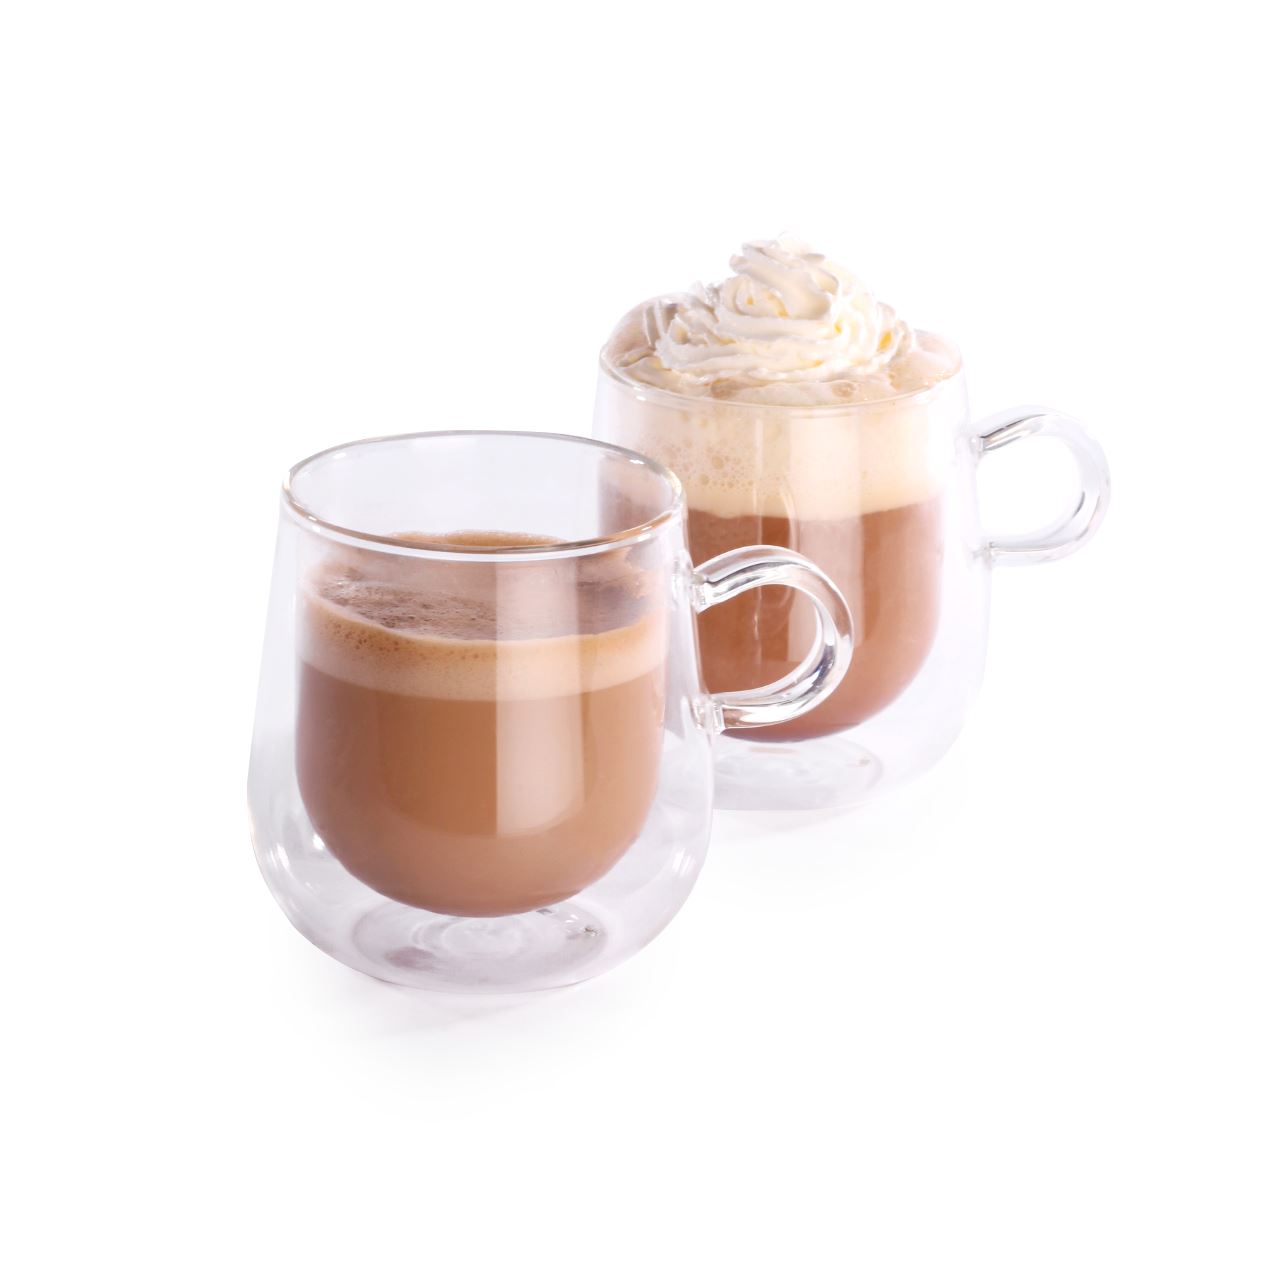 Double Walled 80ml Espresso Coffee Glasses with Handles - Set of 2 | M&W